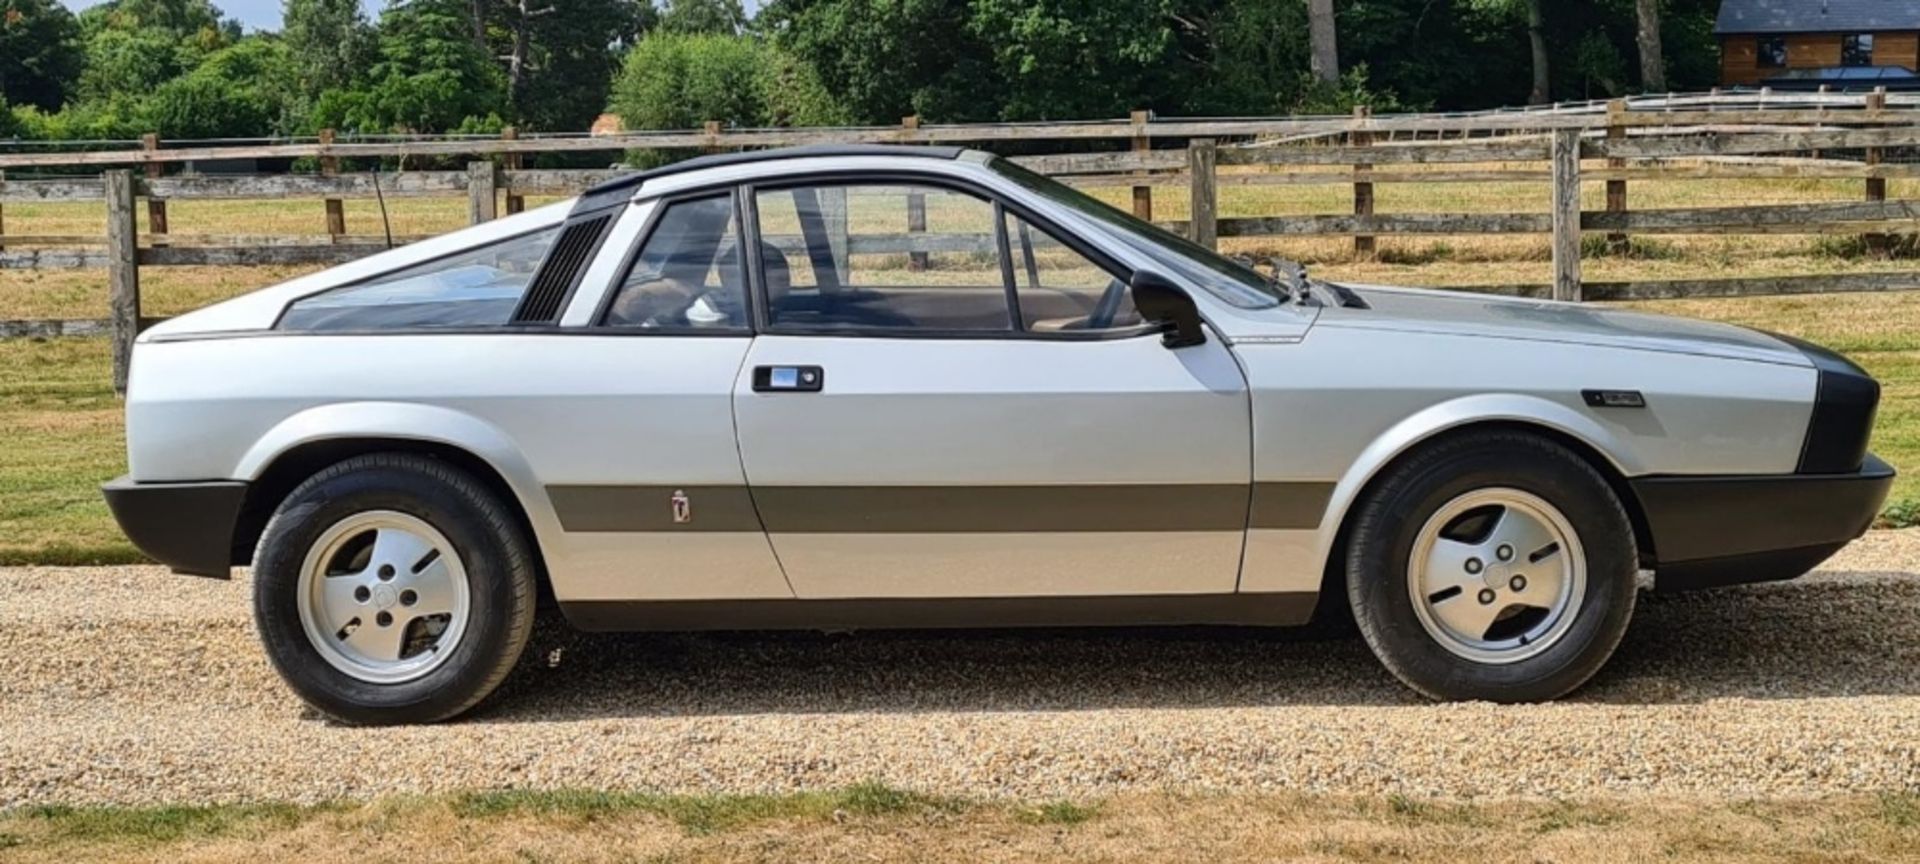 1978 LANCIA MONTECARLO SPIDER Registration Number: XLP 670S Chassis Number: TBA Recorded Mileage: - Image 4 of 12